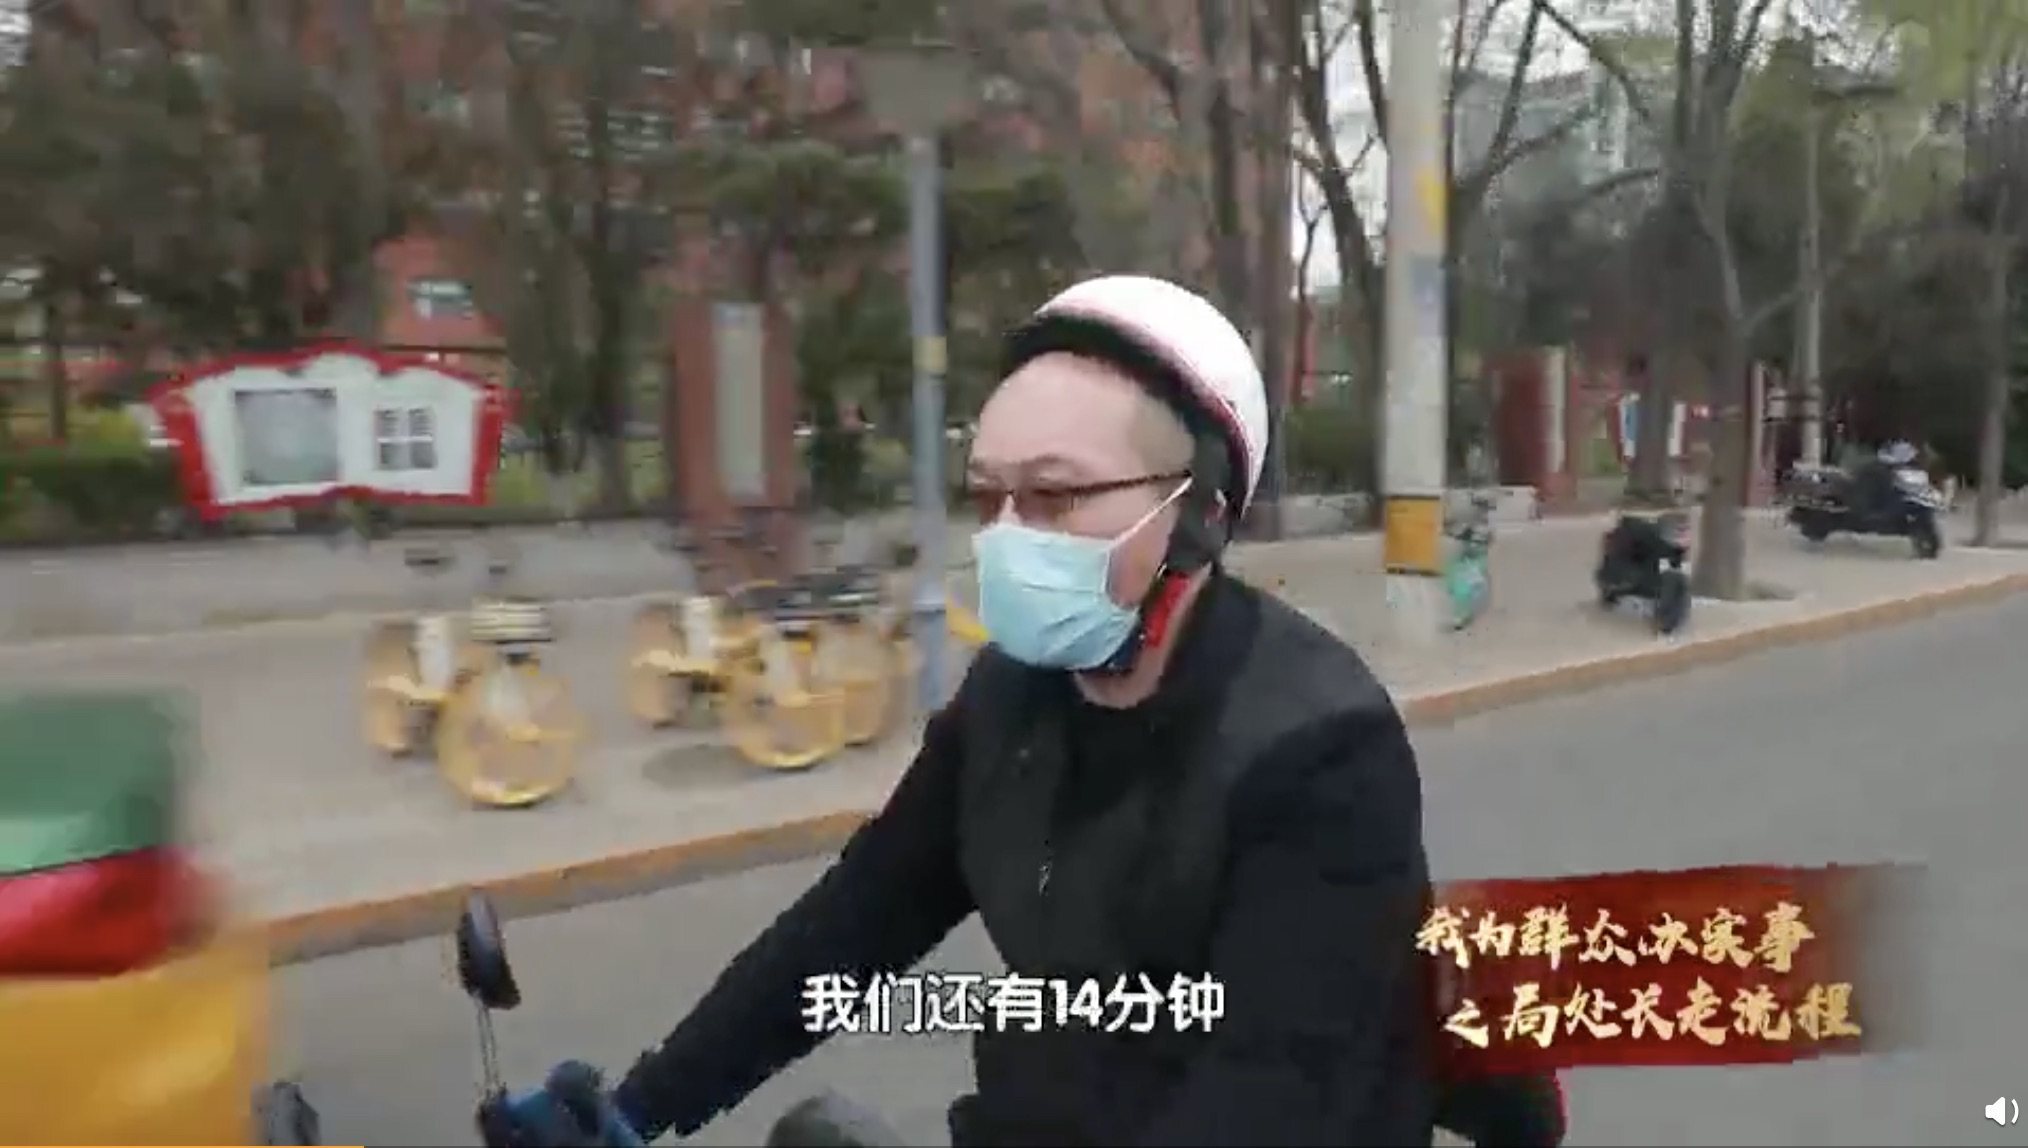 Wang Lin, the deputy director of the Beijing Municipal Human Resources and Social Security Bureau’s labour relations division, is shown spending a day working as a Meituan delivery driver in Beijing, China, in a video clip released on April 28, 2021. Photo: Screenshot via Weibo